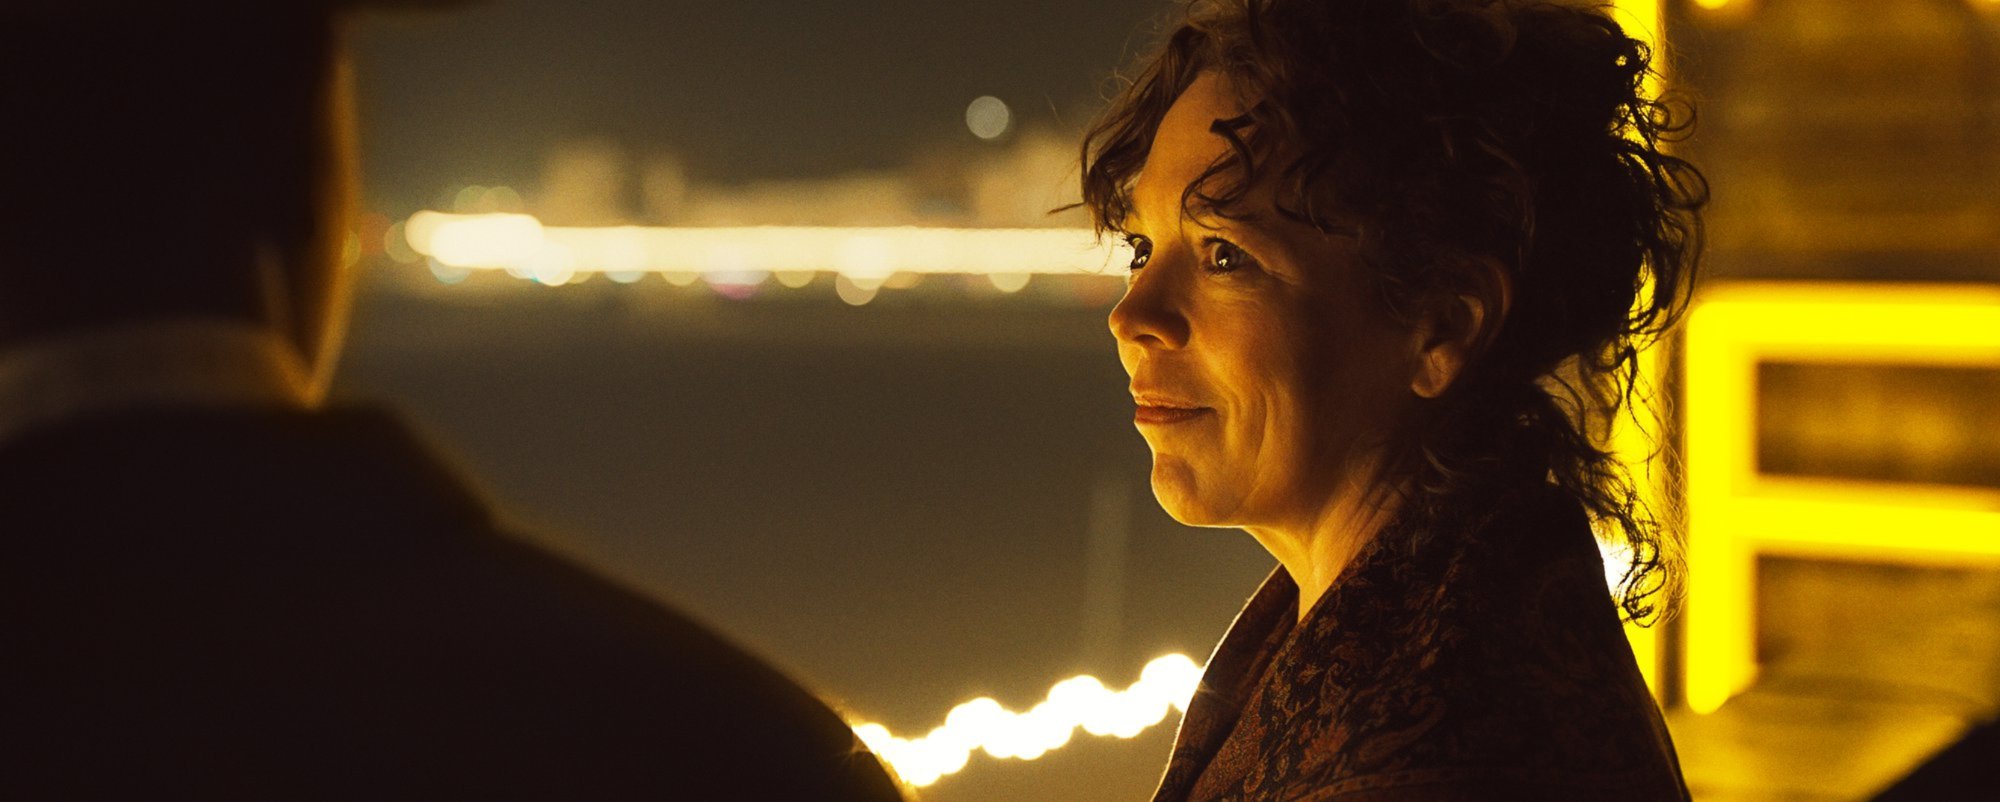 'Empire of Light' Olivia Colman as Hilary looking at Micheal Ward as Stephen, shown from behind. They're standing on a rooftop.